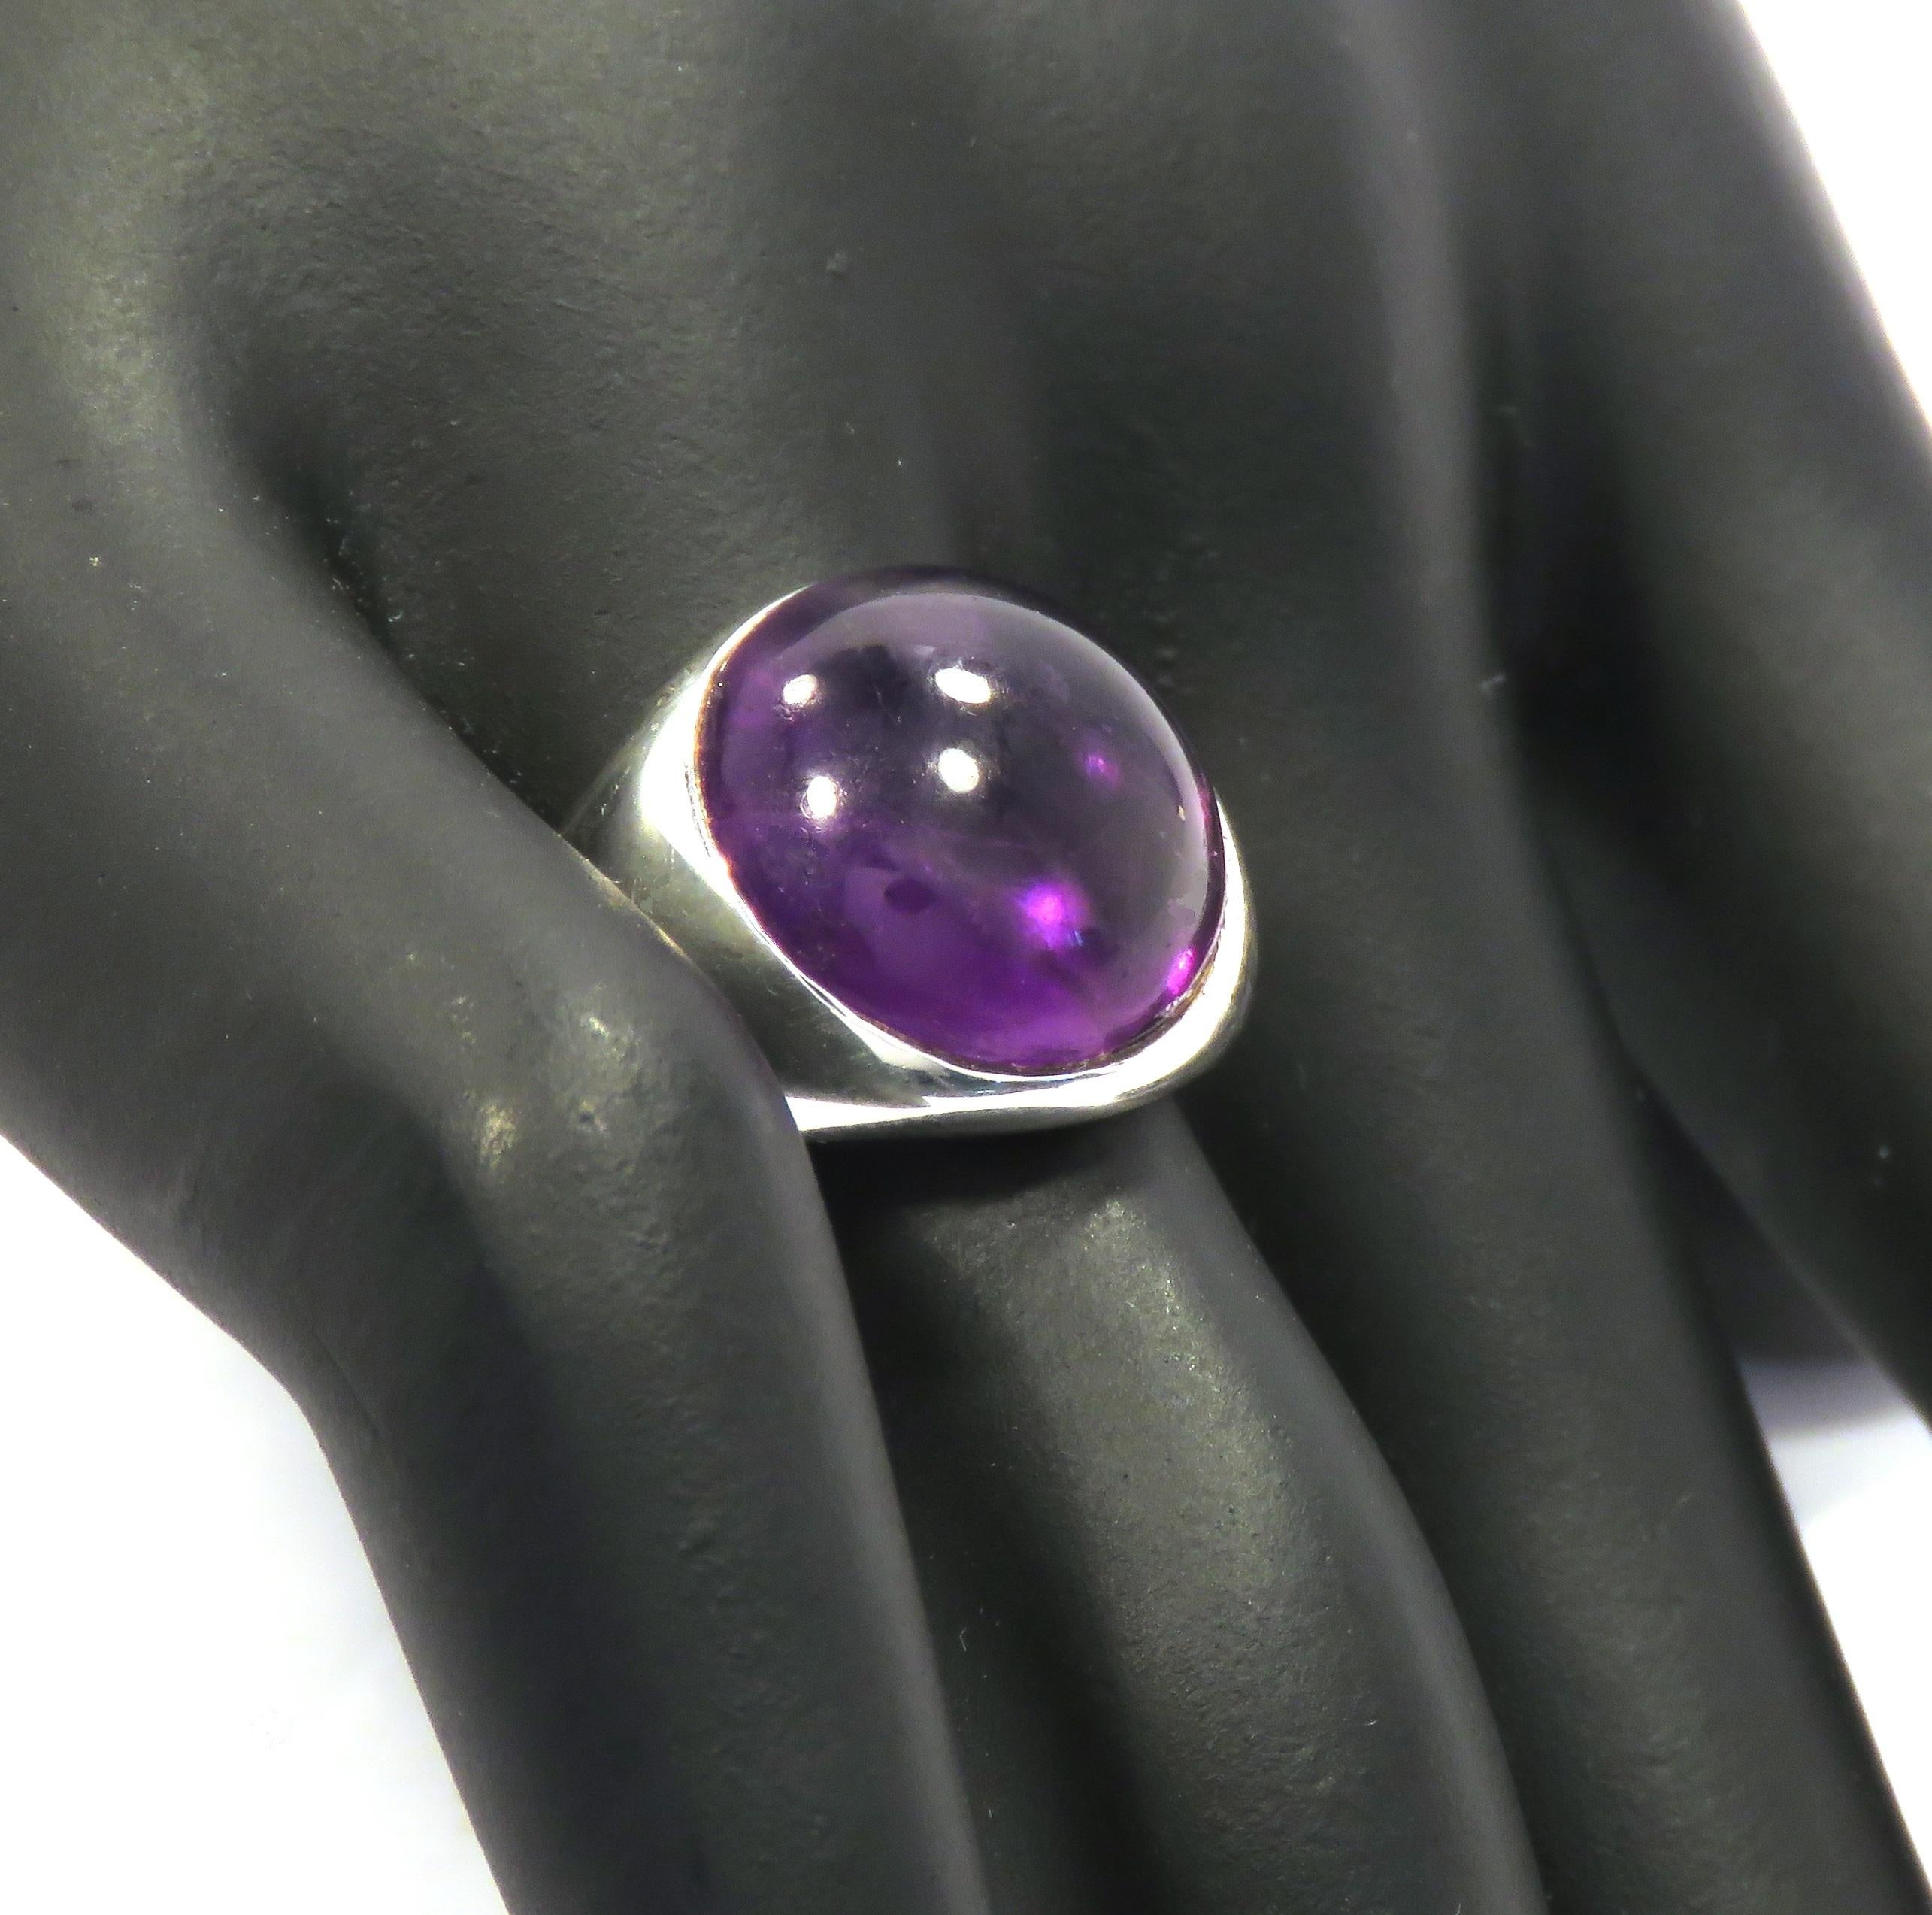 Beautiful cabochon cut amethyst in a contemporary band ring crafted in sterling silver. The size of the gemstone is 14x14 mm / 0.551x0.551 inches. US finger size is 7, French size 55, Italian size 15, resizable to the customer's size before